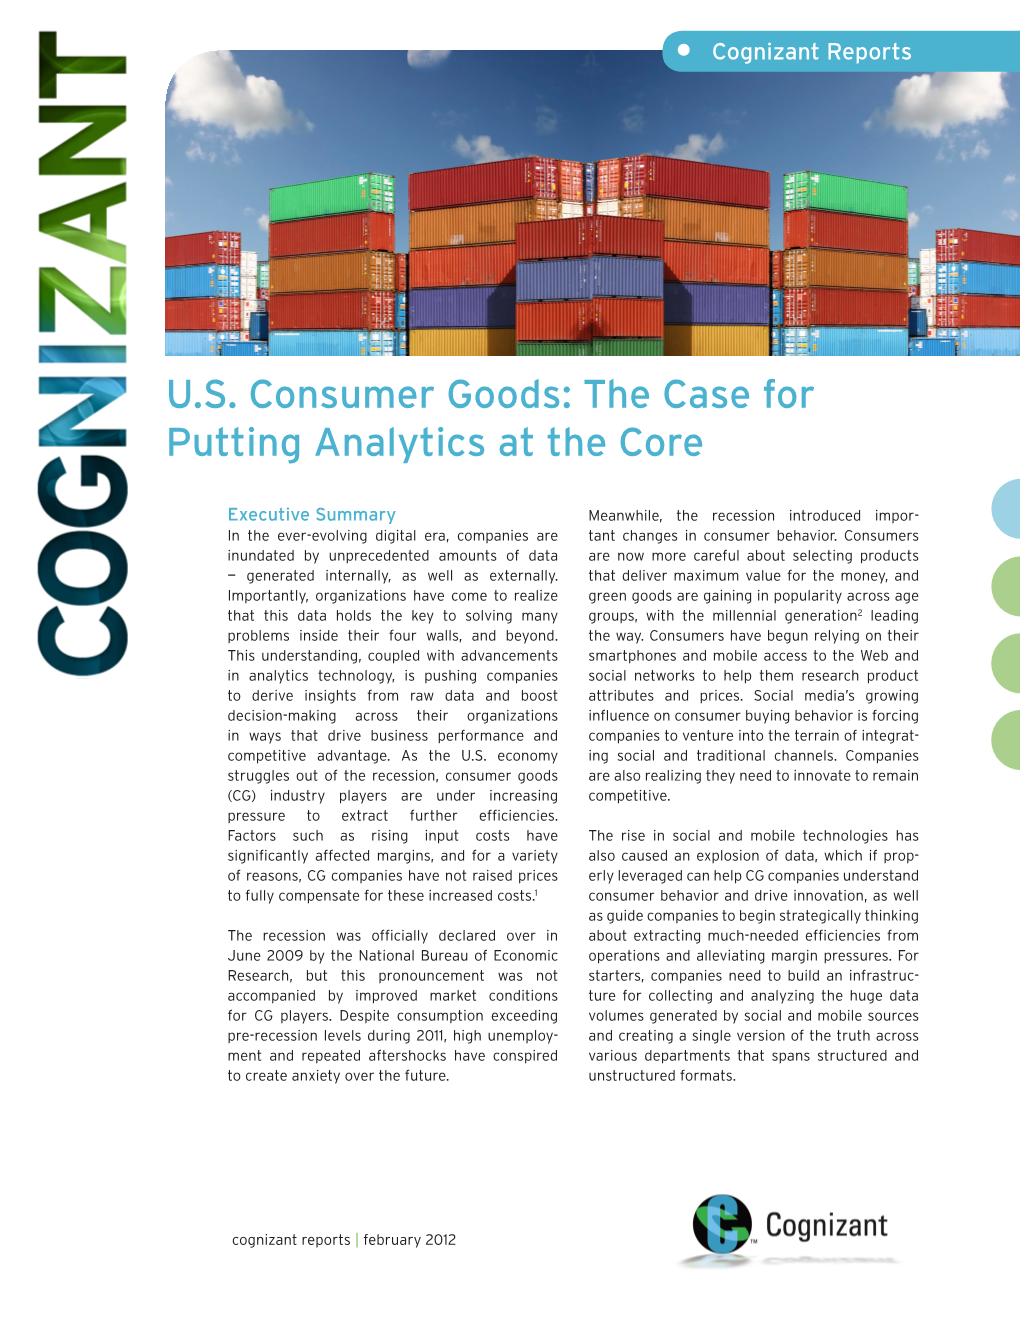 U.S. Consumer Goods: the Case for Putting Analytics at the Core